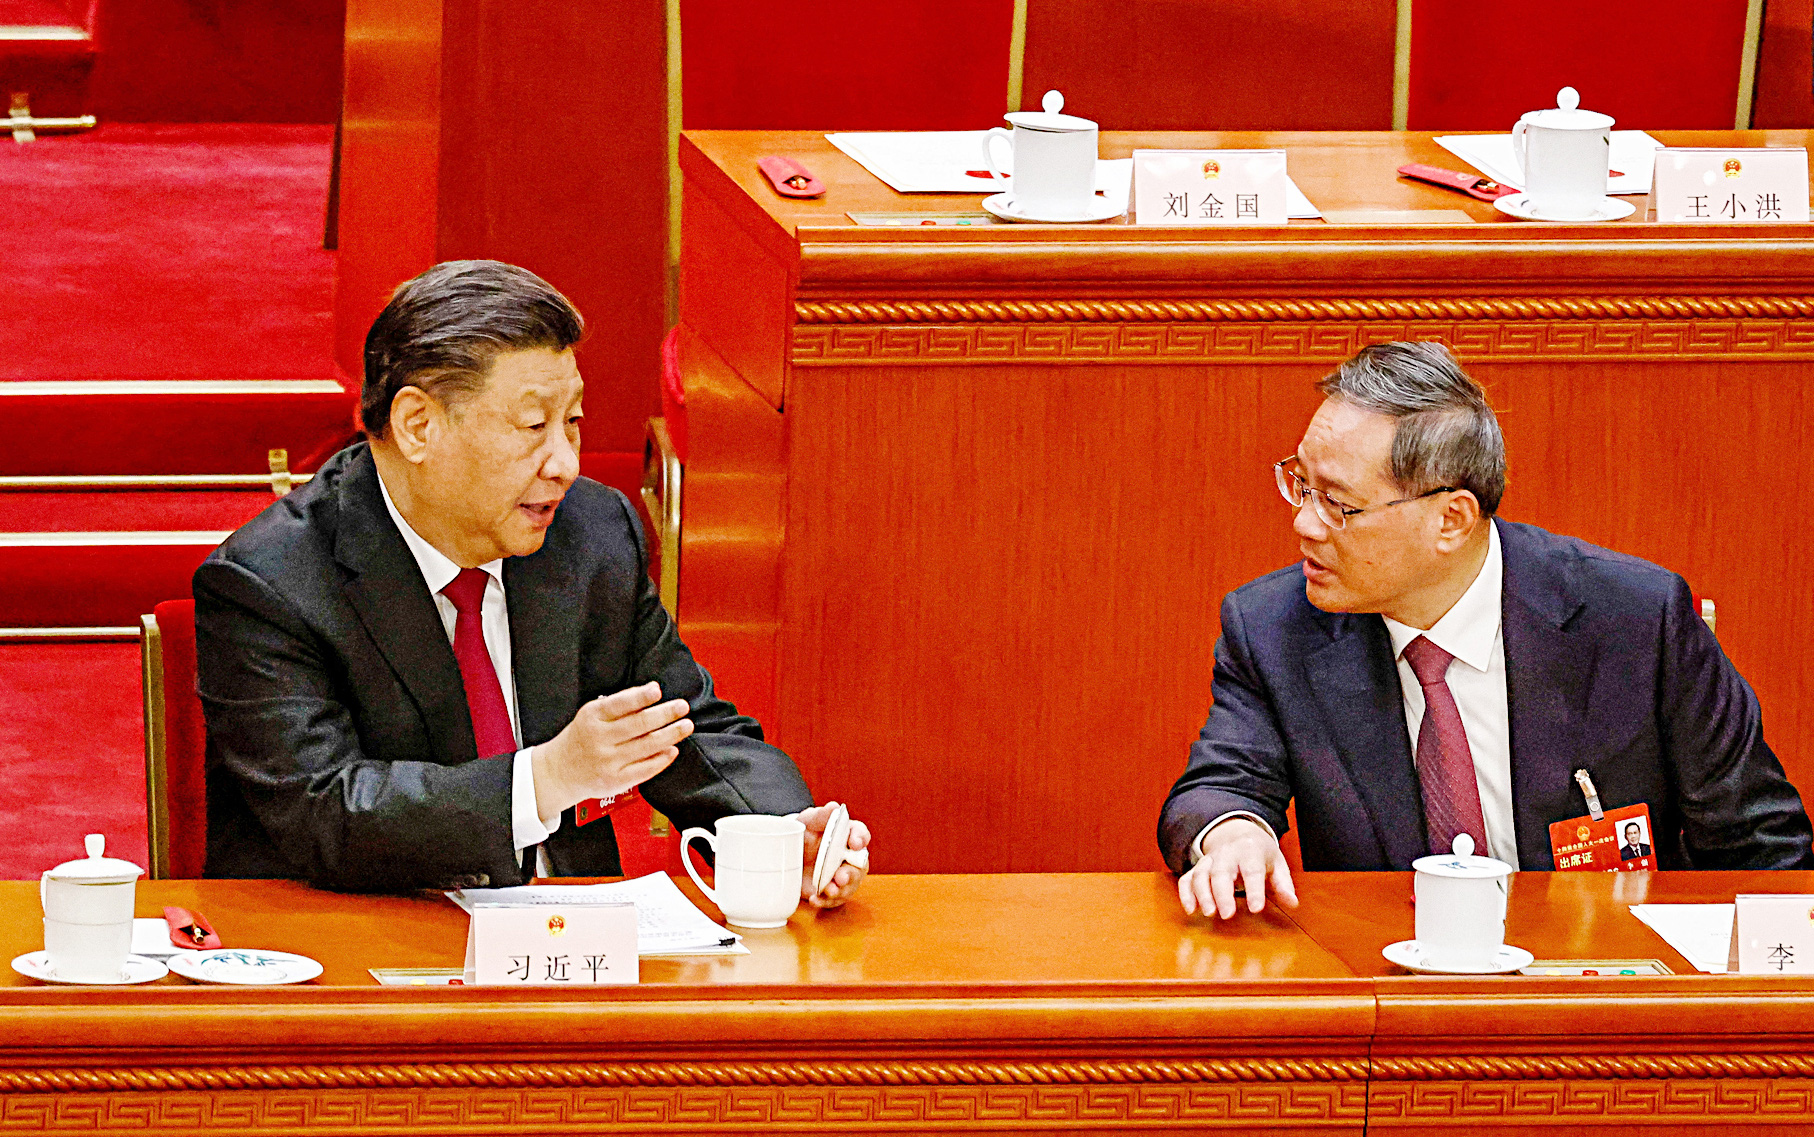 Chinese President Xi Jinping talks with Li Qiang, who is expected to become prime minister, at the 14th National People's Congress session in Beijing on March 10.  In front of Mr. Xi are two cups of tea, while Mr. Li has only one - Photo: Reuters